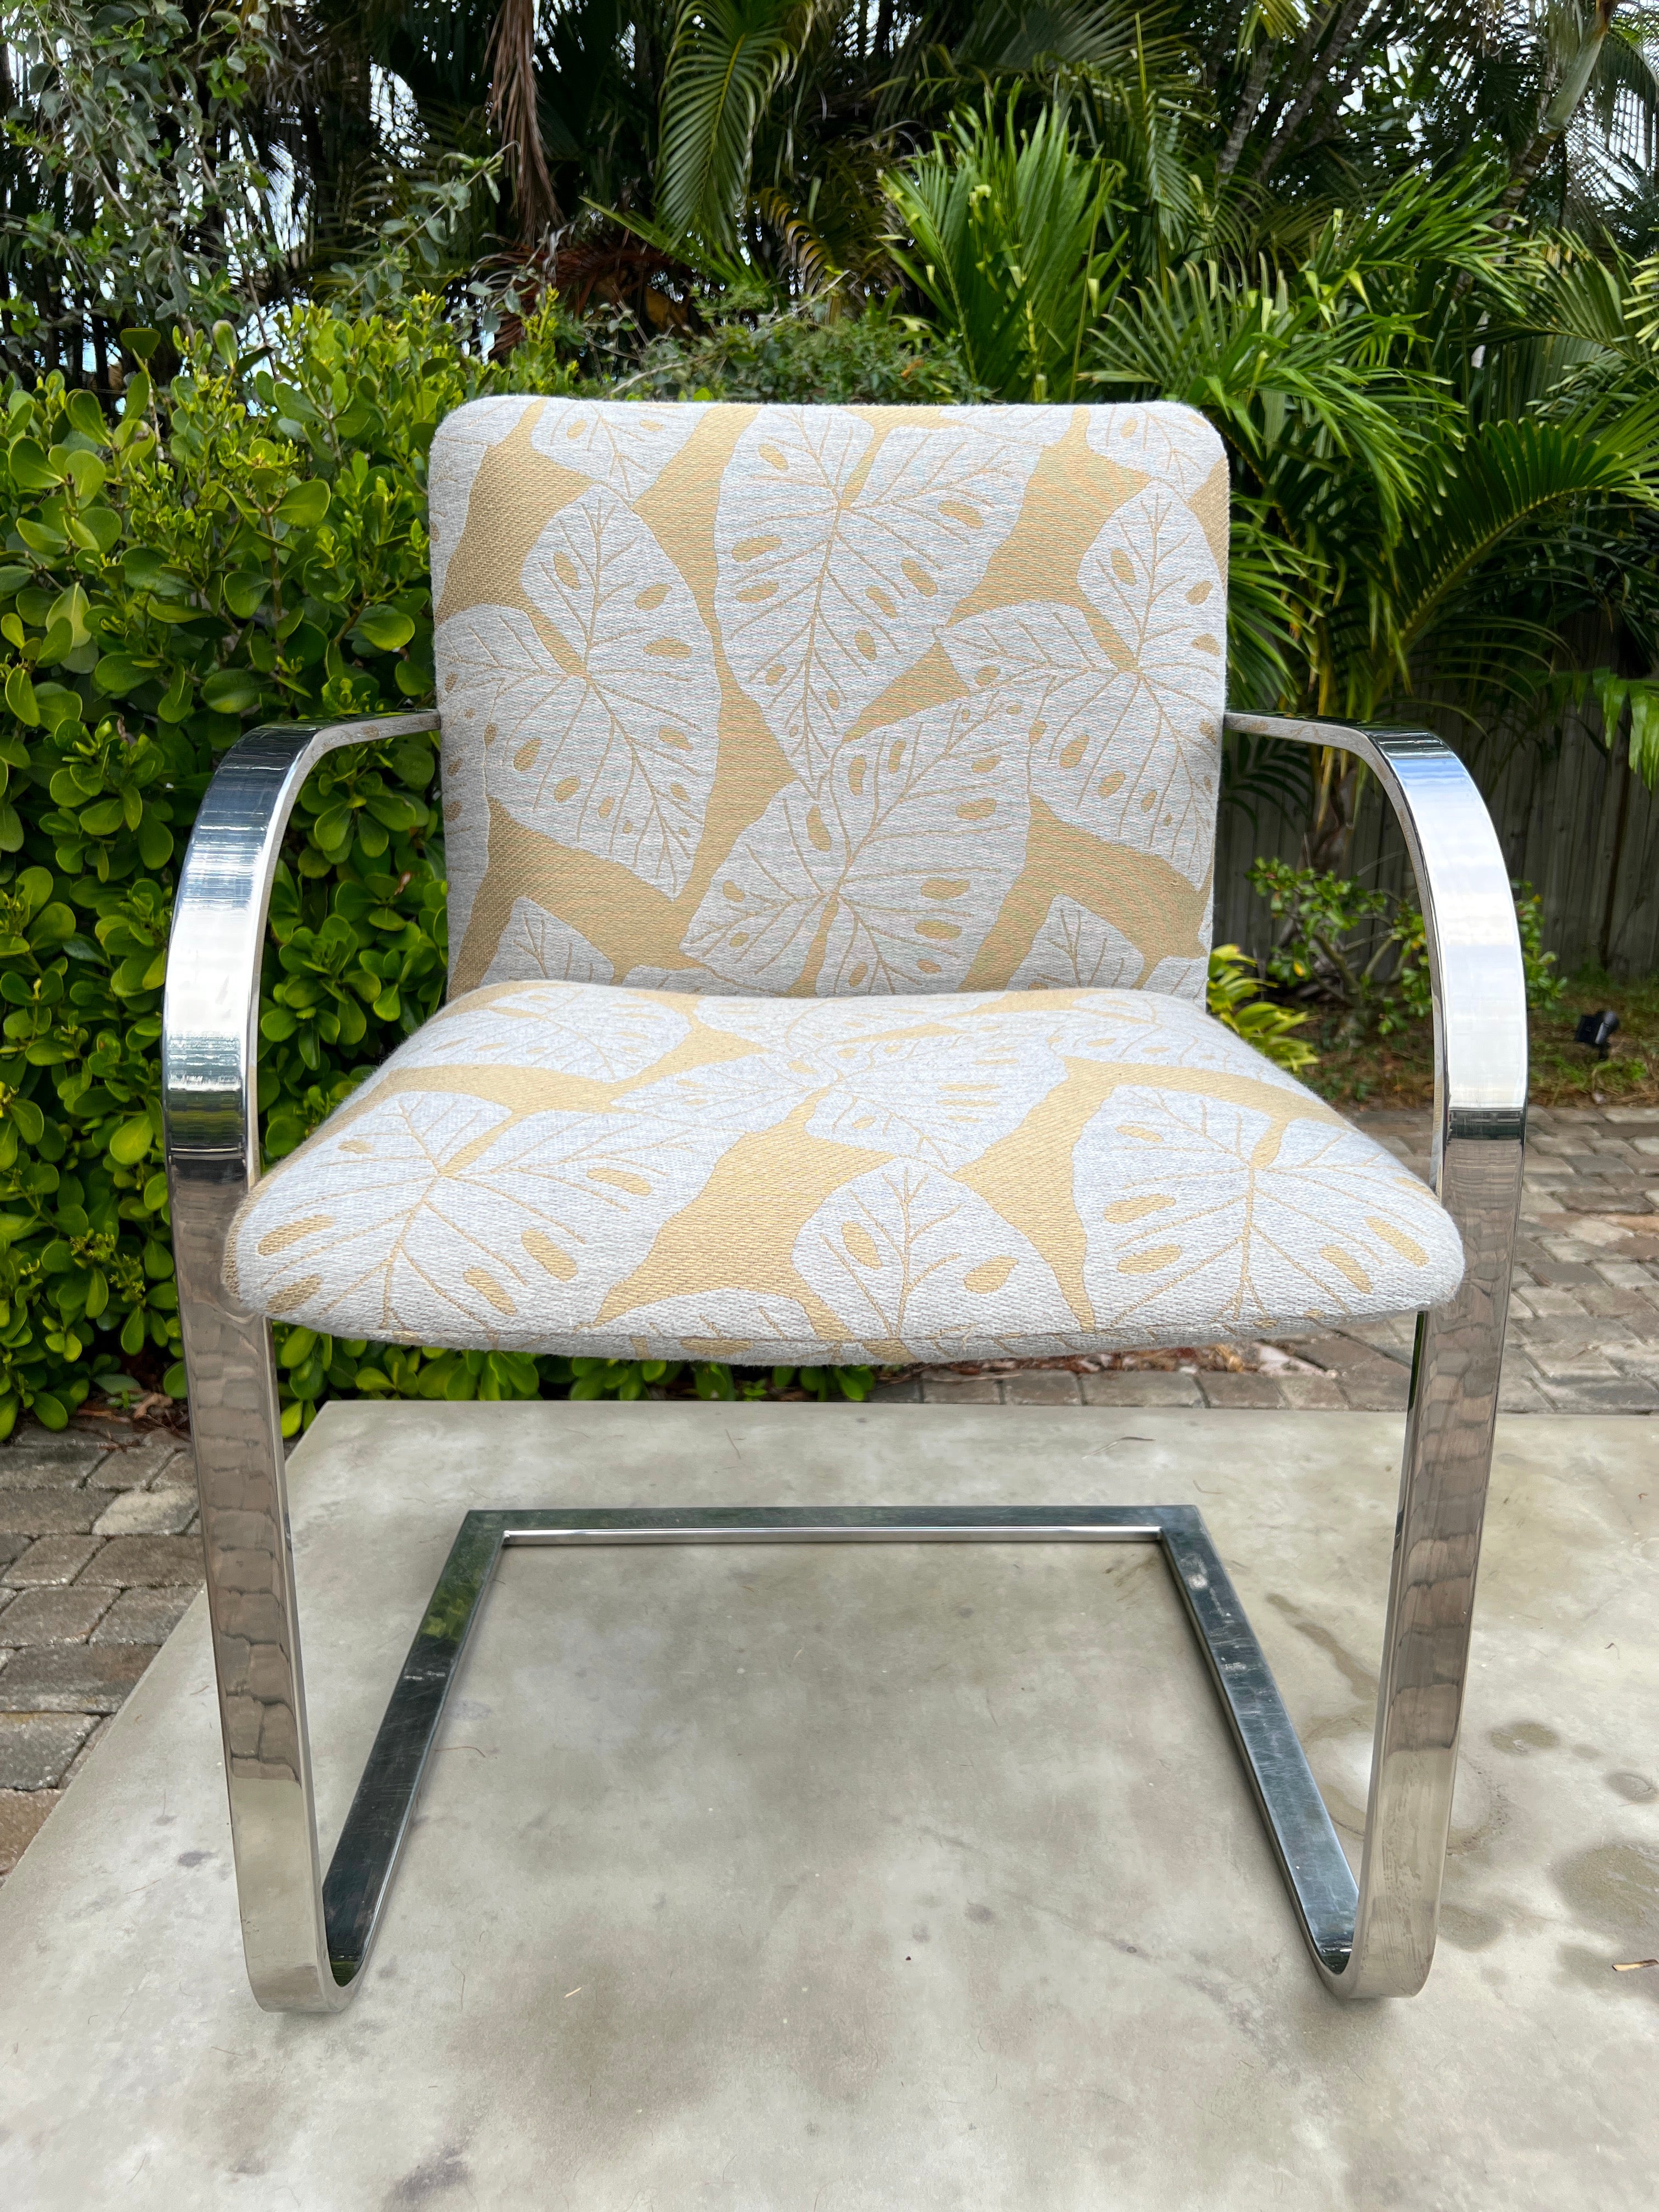 Mid-Century Modern desk chair or side chair with cantilevered steel frame in chrome. Chair has streamlined profile with curved armrests and floating seat design. Newly upholstered in handwoven fabric with bold coastal or tropical leaf print in hues